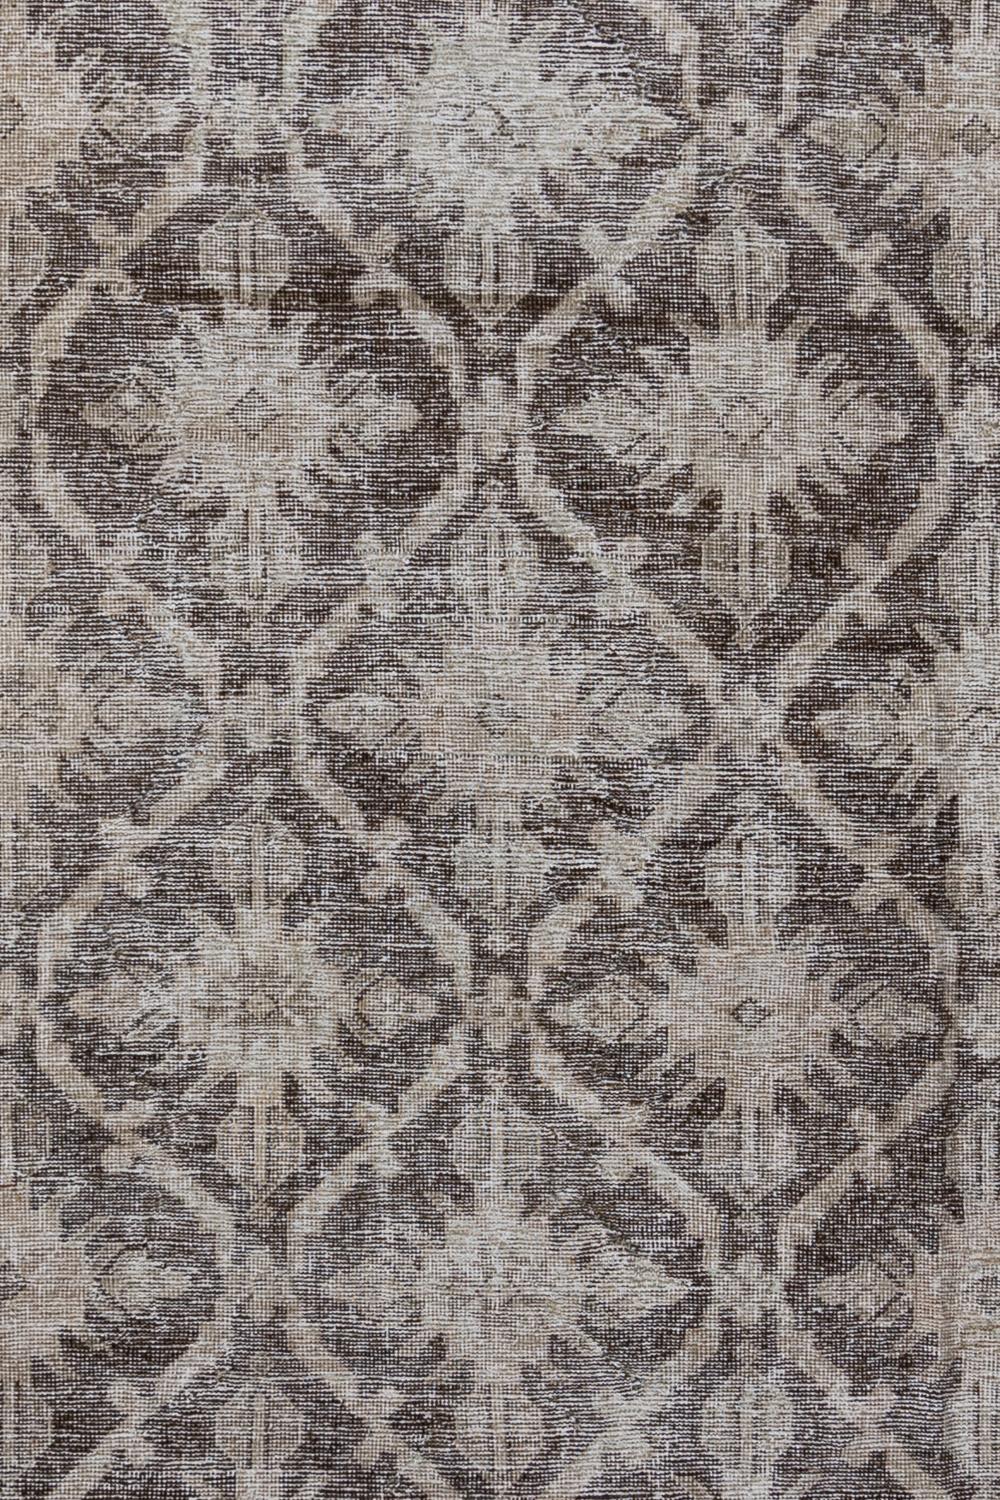 Age: 1910

Pile: Low

Wear Notes: 4-5

Material: Wool on Cotton

Vintage rugs are made by hand over the course of months, sometimes years. Their imperfections and wear are evidence of the hard working human hands that made them and the